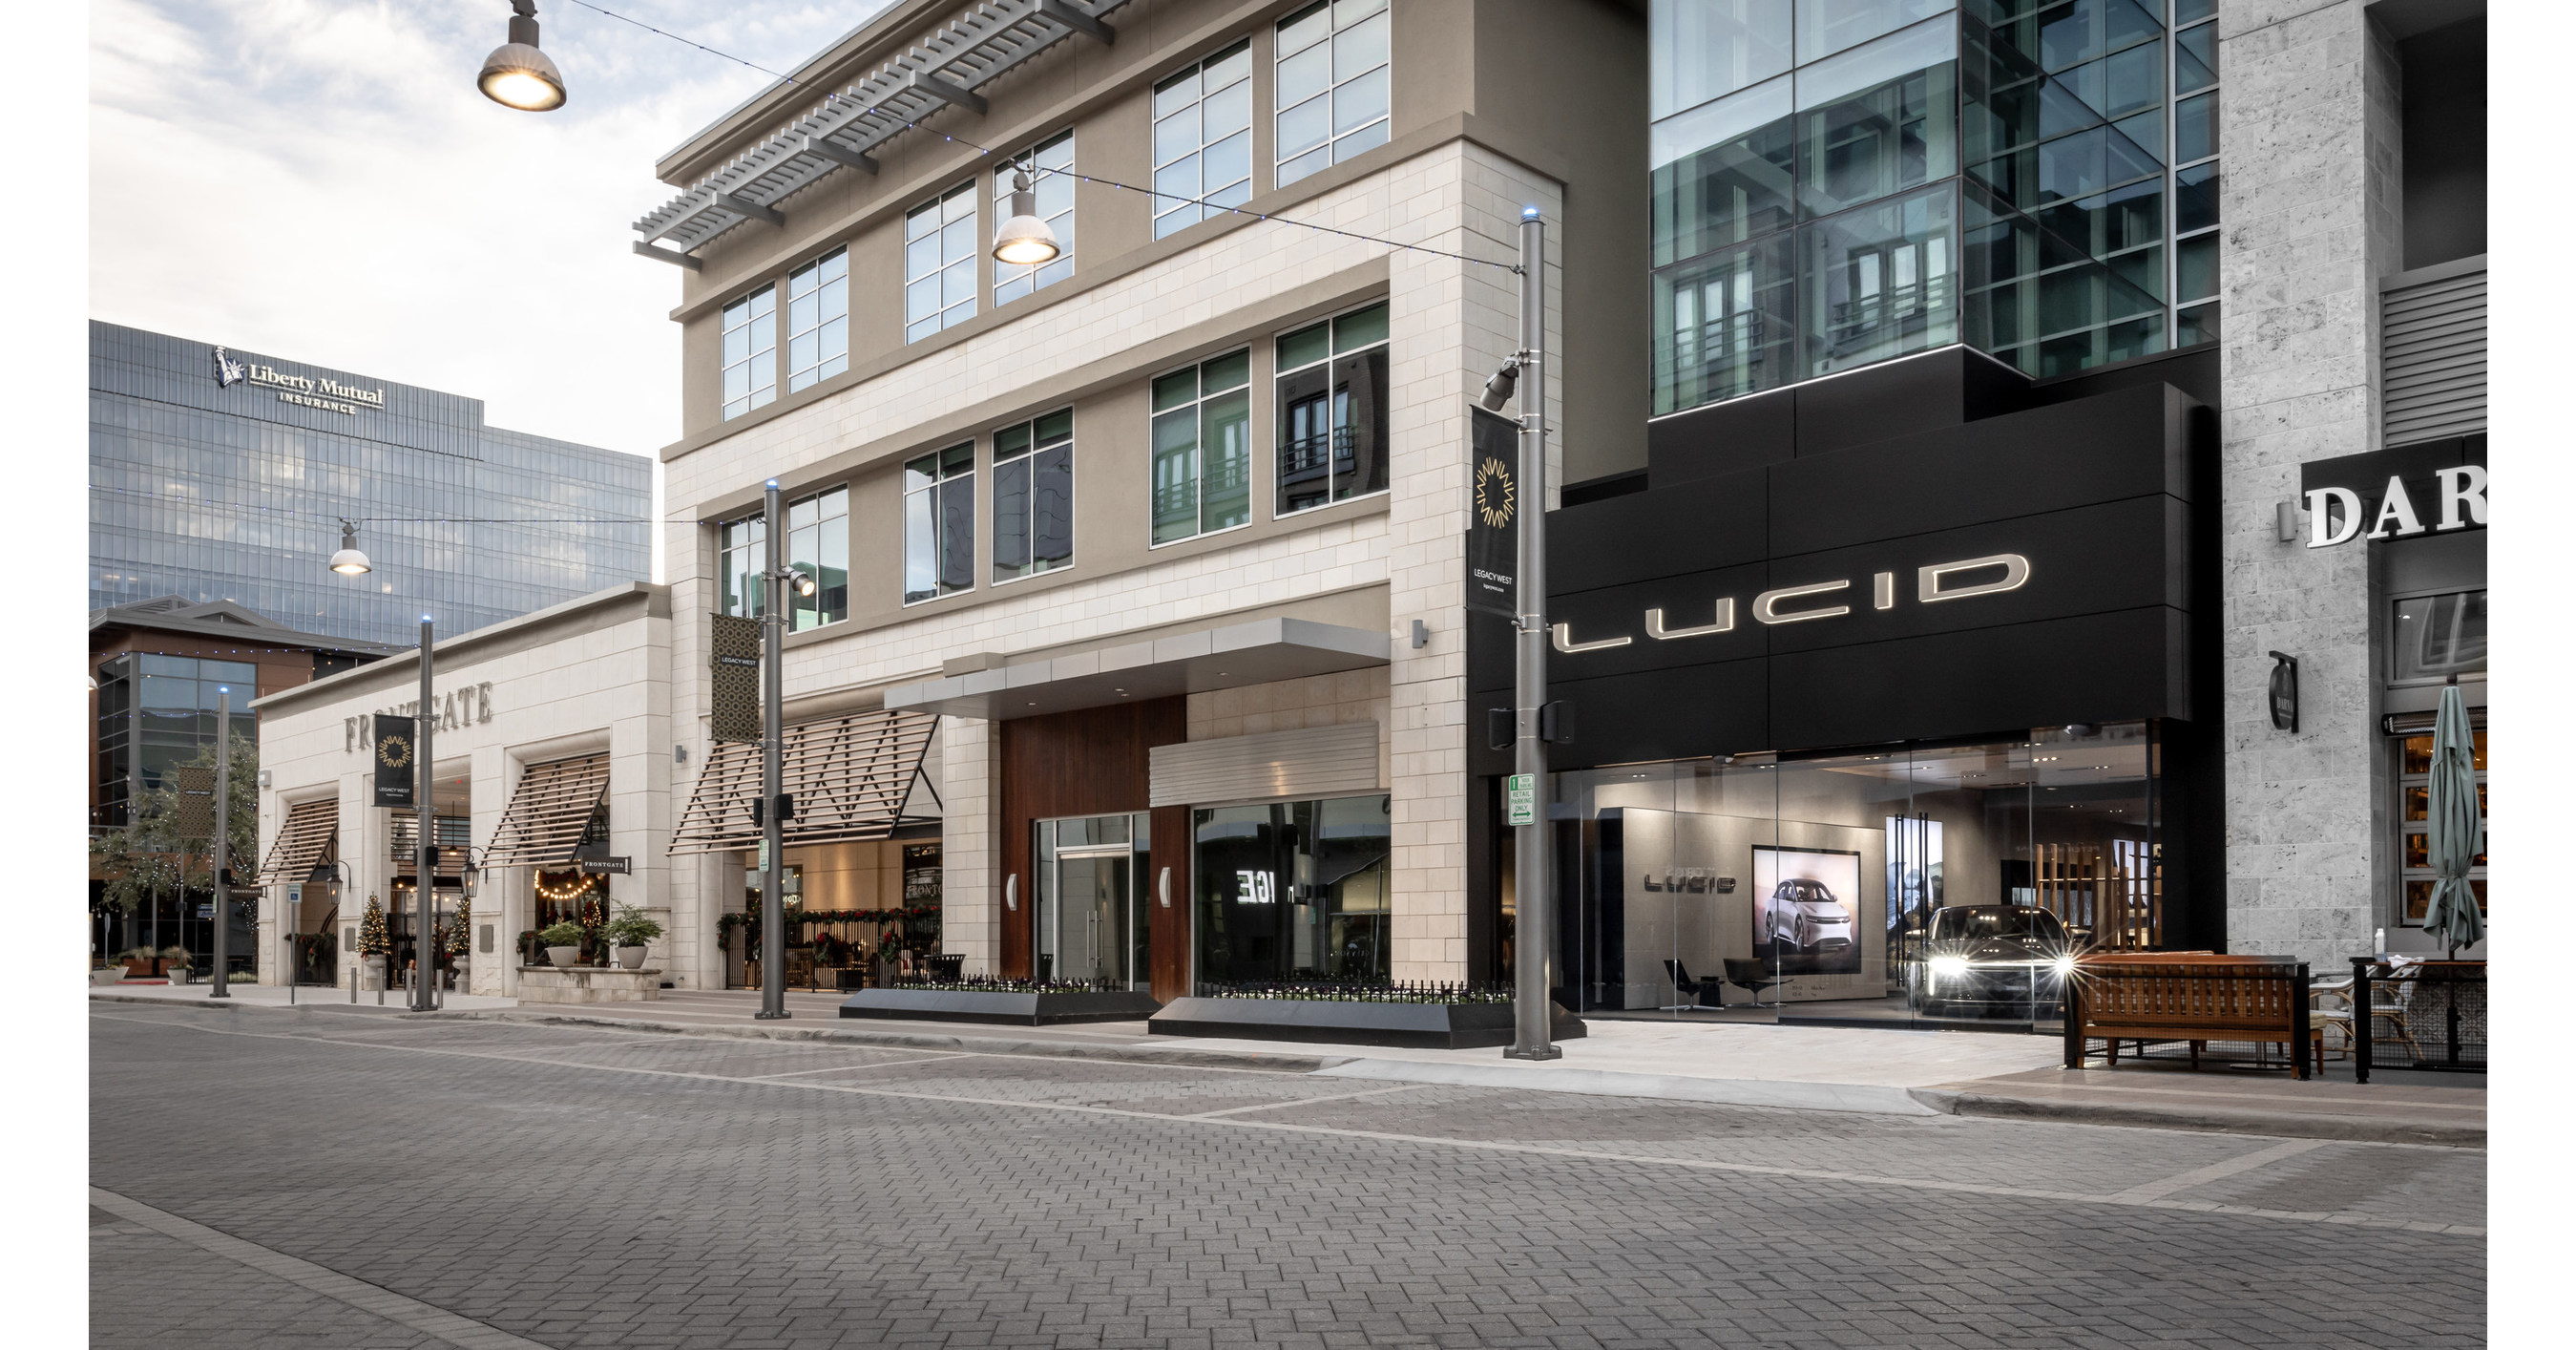 Lucid Motors Opens First Retail Studio Location in Texas, the Dallas Studio  at Legacy West